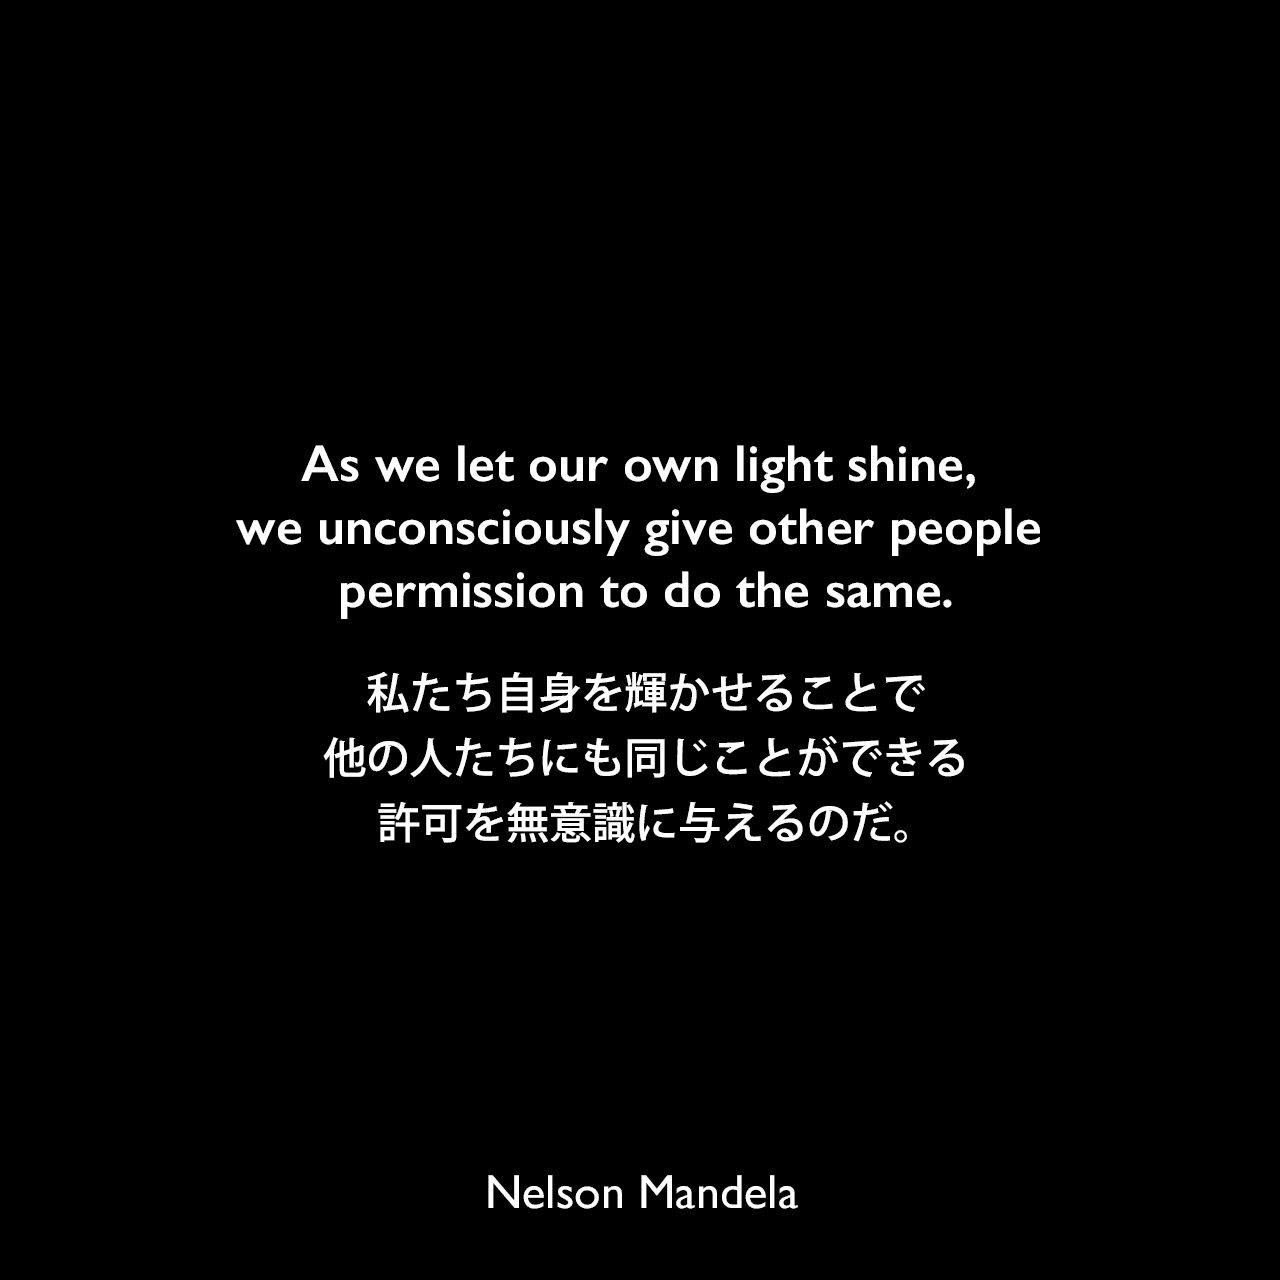 As we let our own light shine, we unconsciously give other people permission to do the same.私たち自身を輝かせることで、他の人たちにも同じことができる許可を無意識に与えるのだ。Nelson Mandela